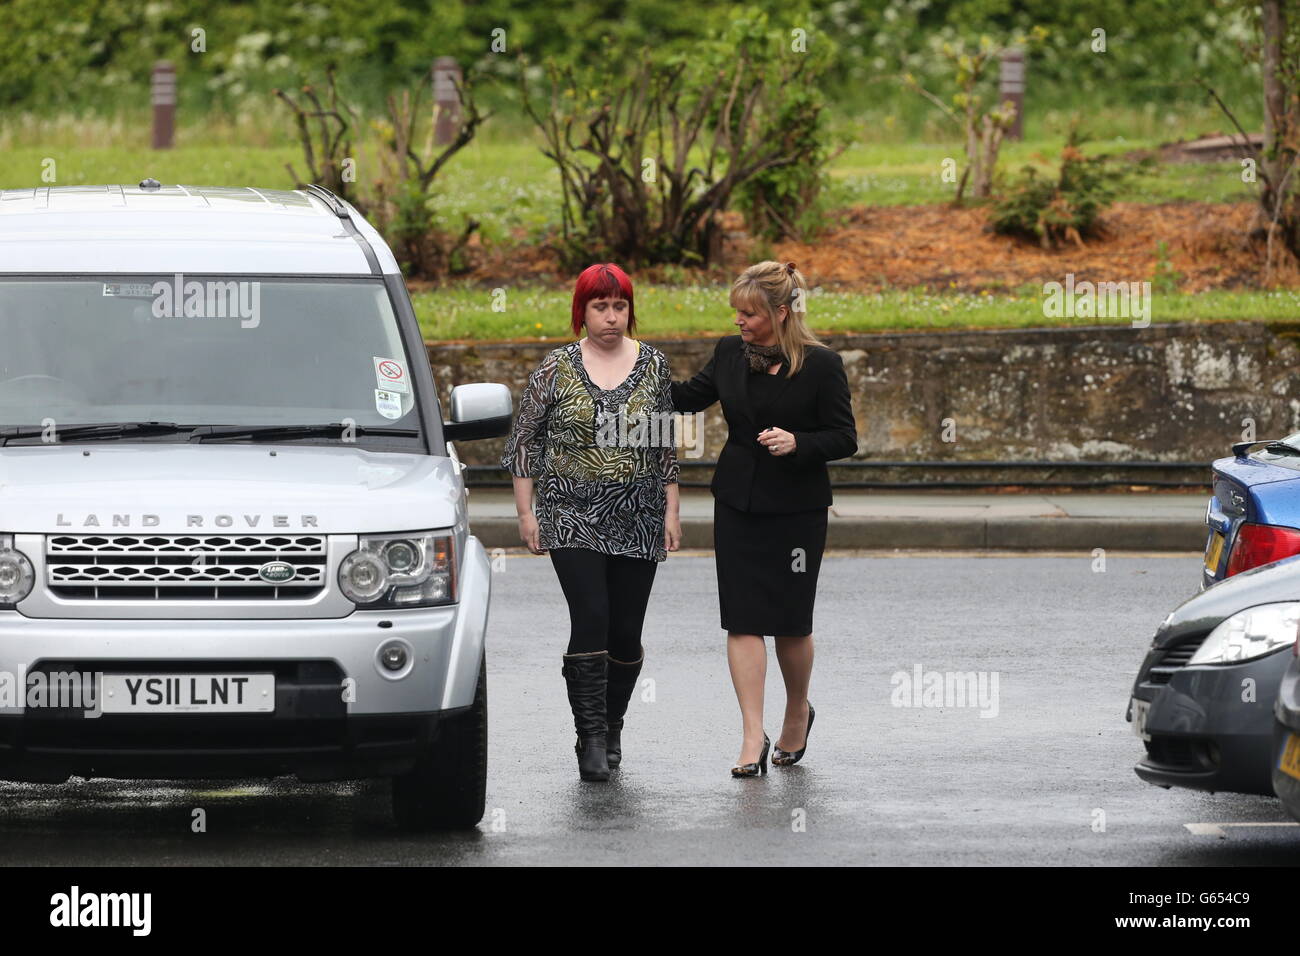 Coral Jones (left) the mother of April Jones, arrives at Mold Crown Court, as the jury continues considering its verdicts today, against Mark Bridger, the man accused of the murder of their daughter April, after it was sent out to begin its deliberations yesterday afternoon after a month long trial. Stock Photo